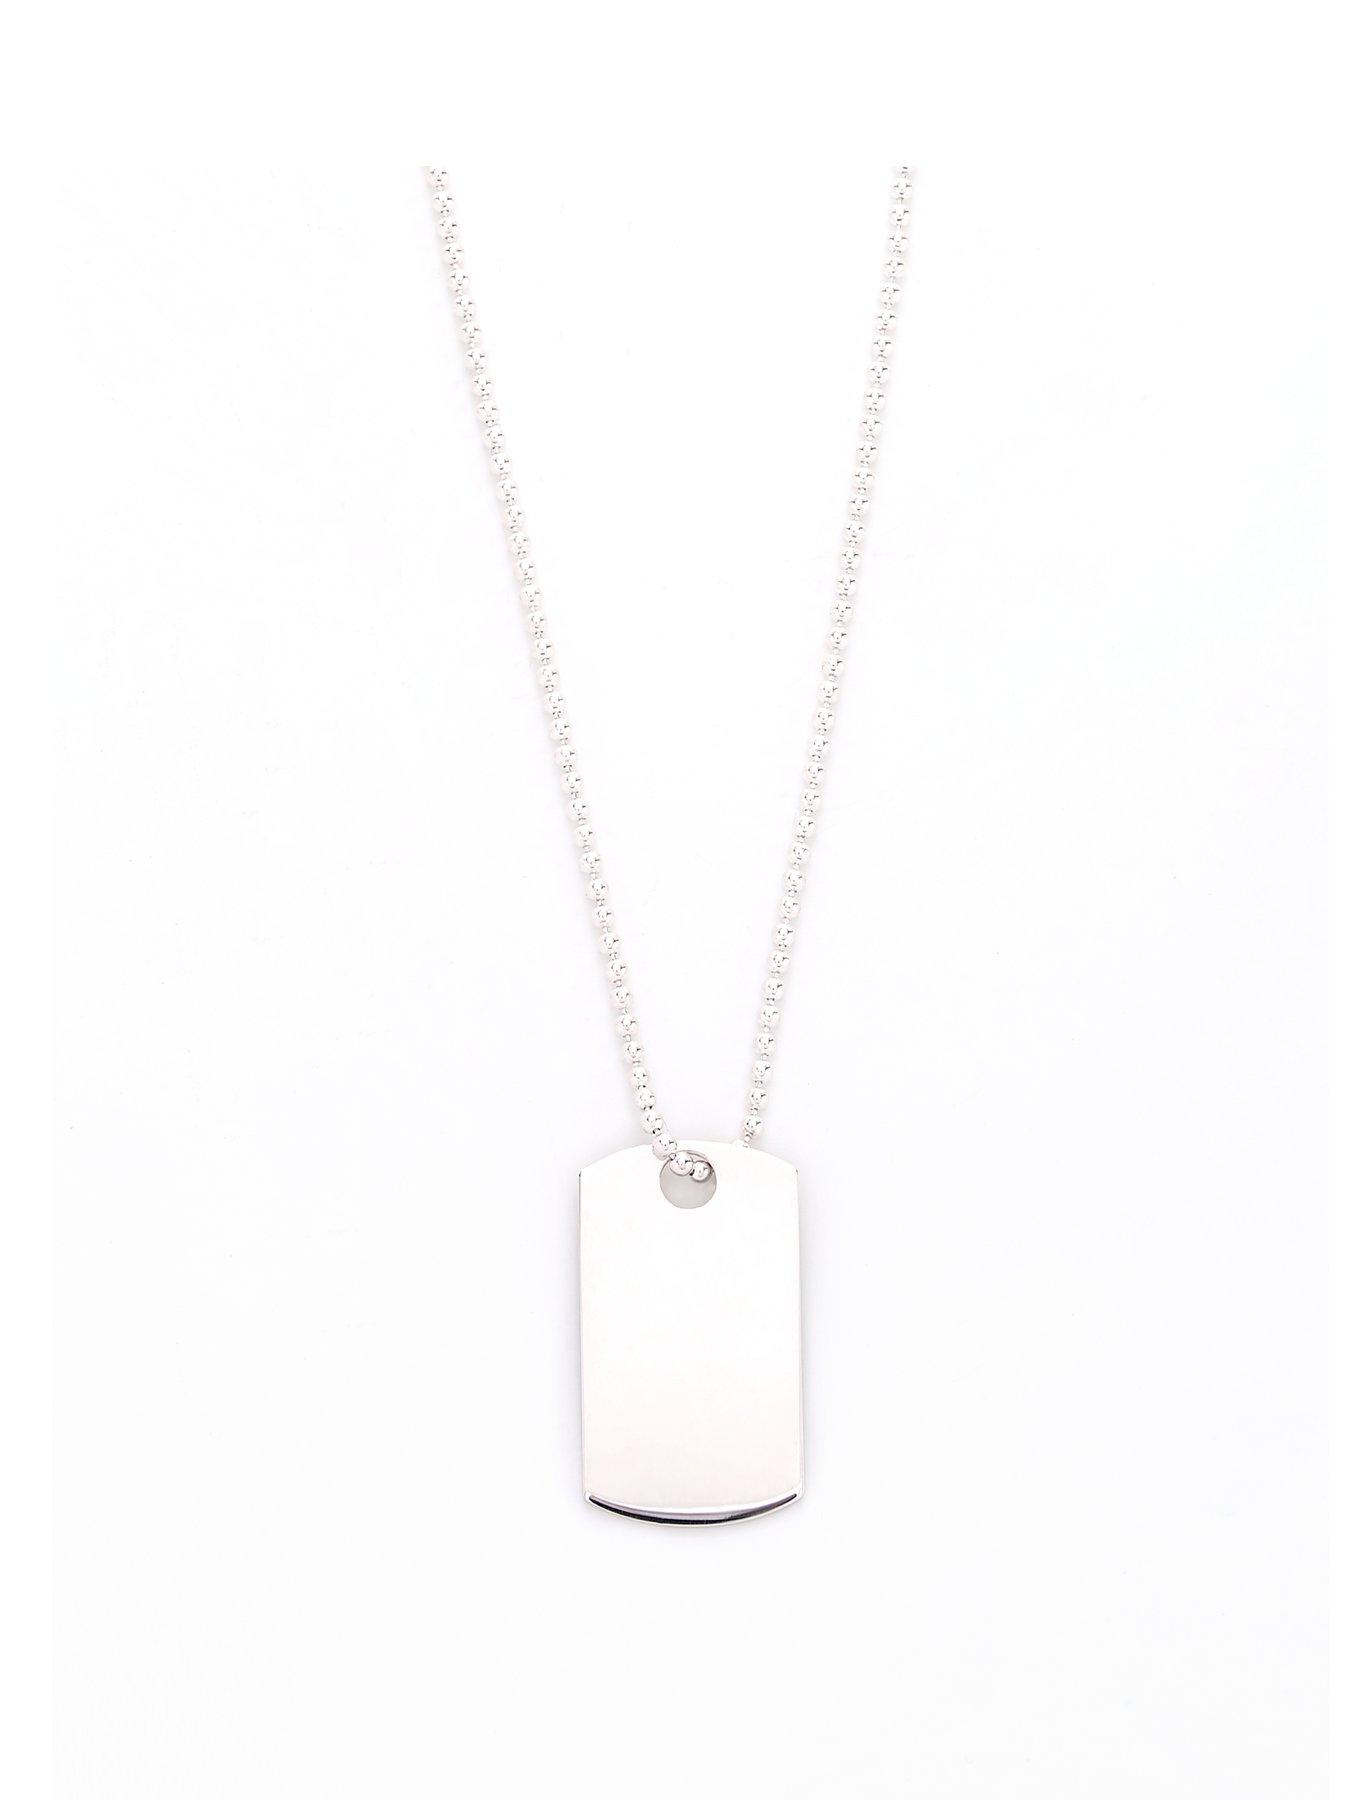  Mens Sterling Silver Dog Tag